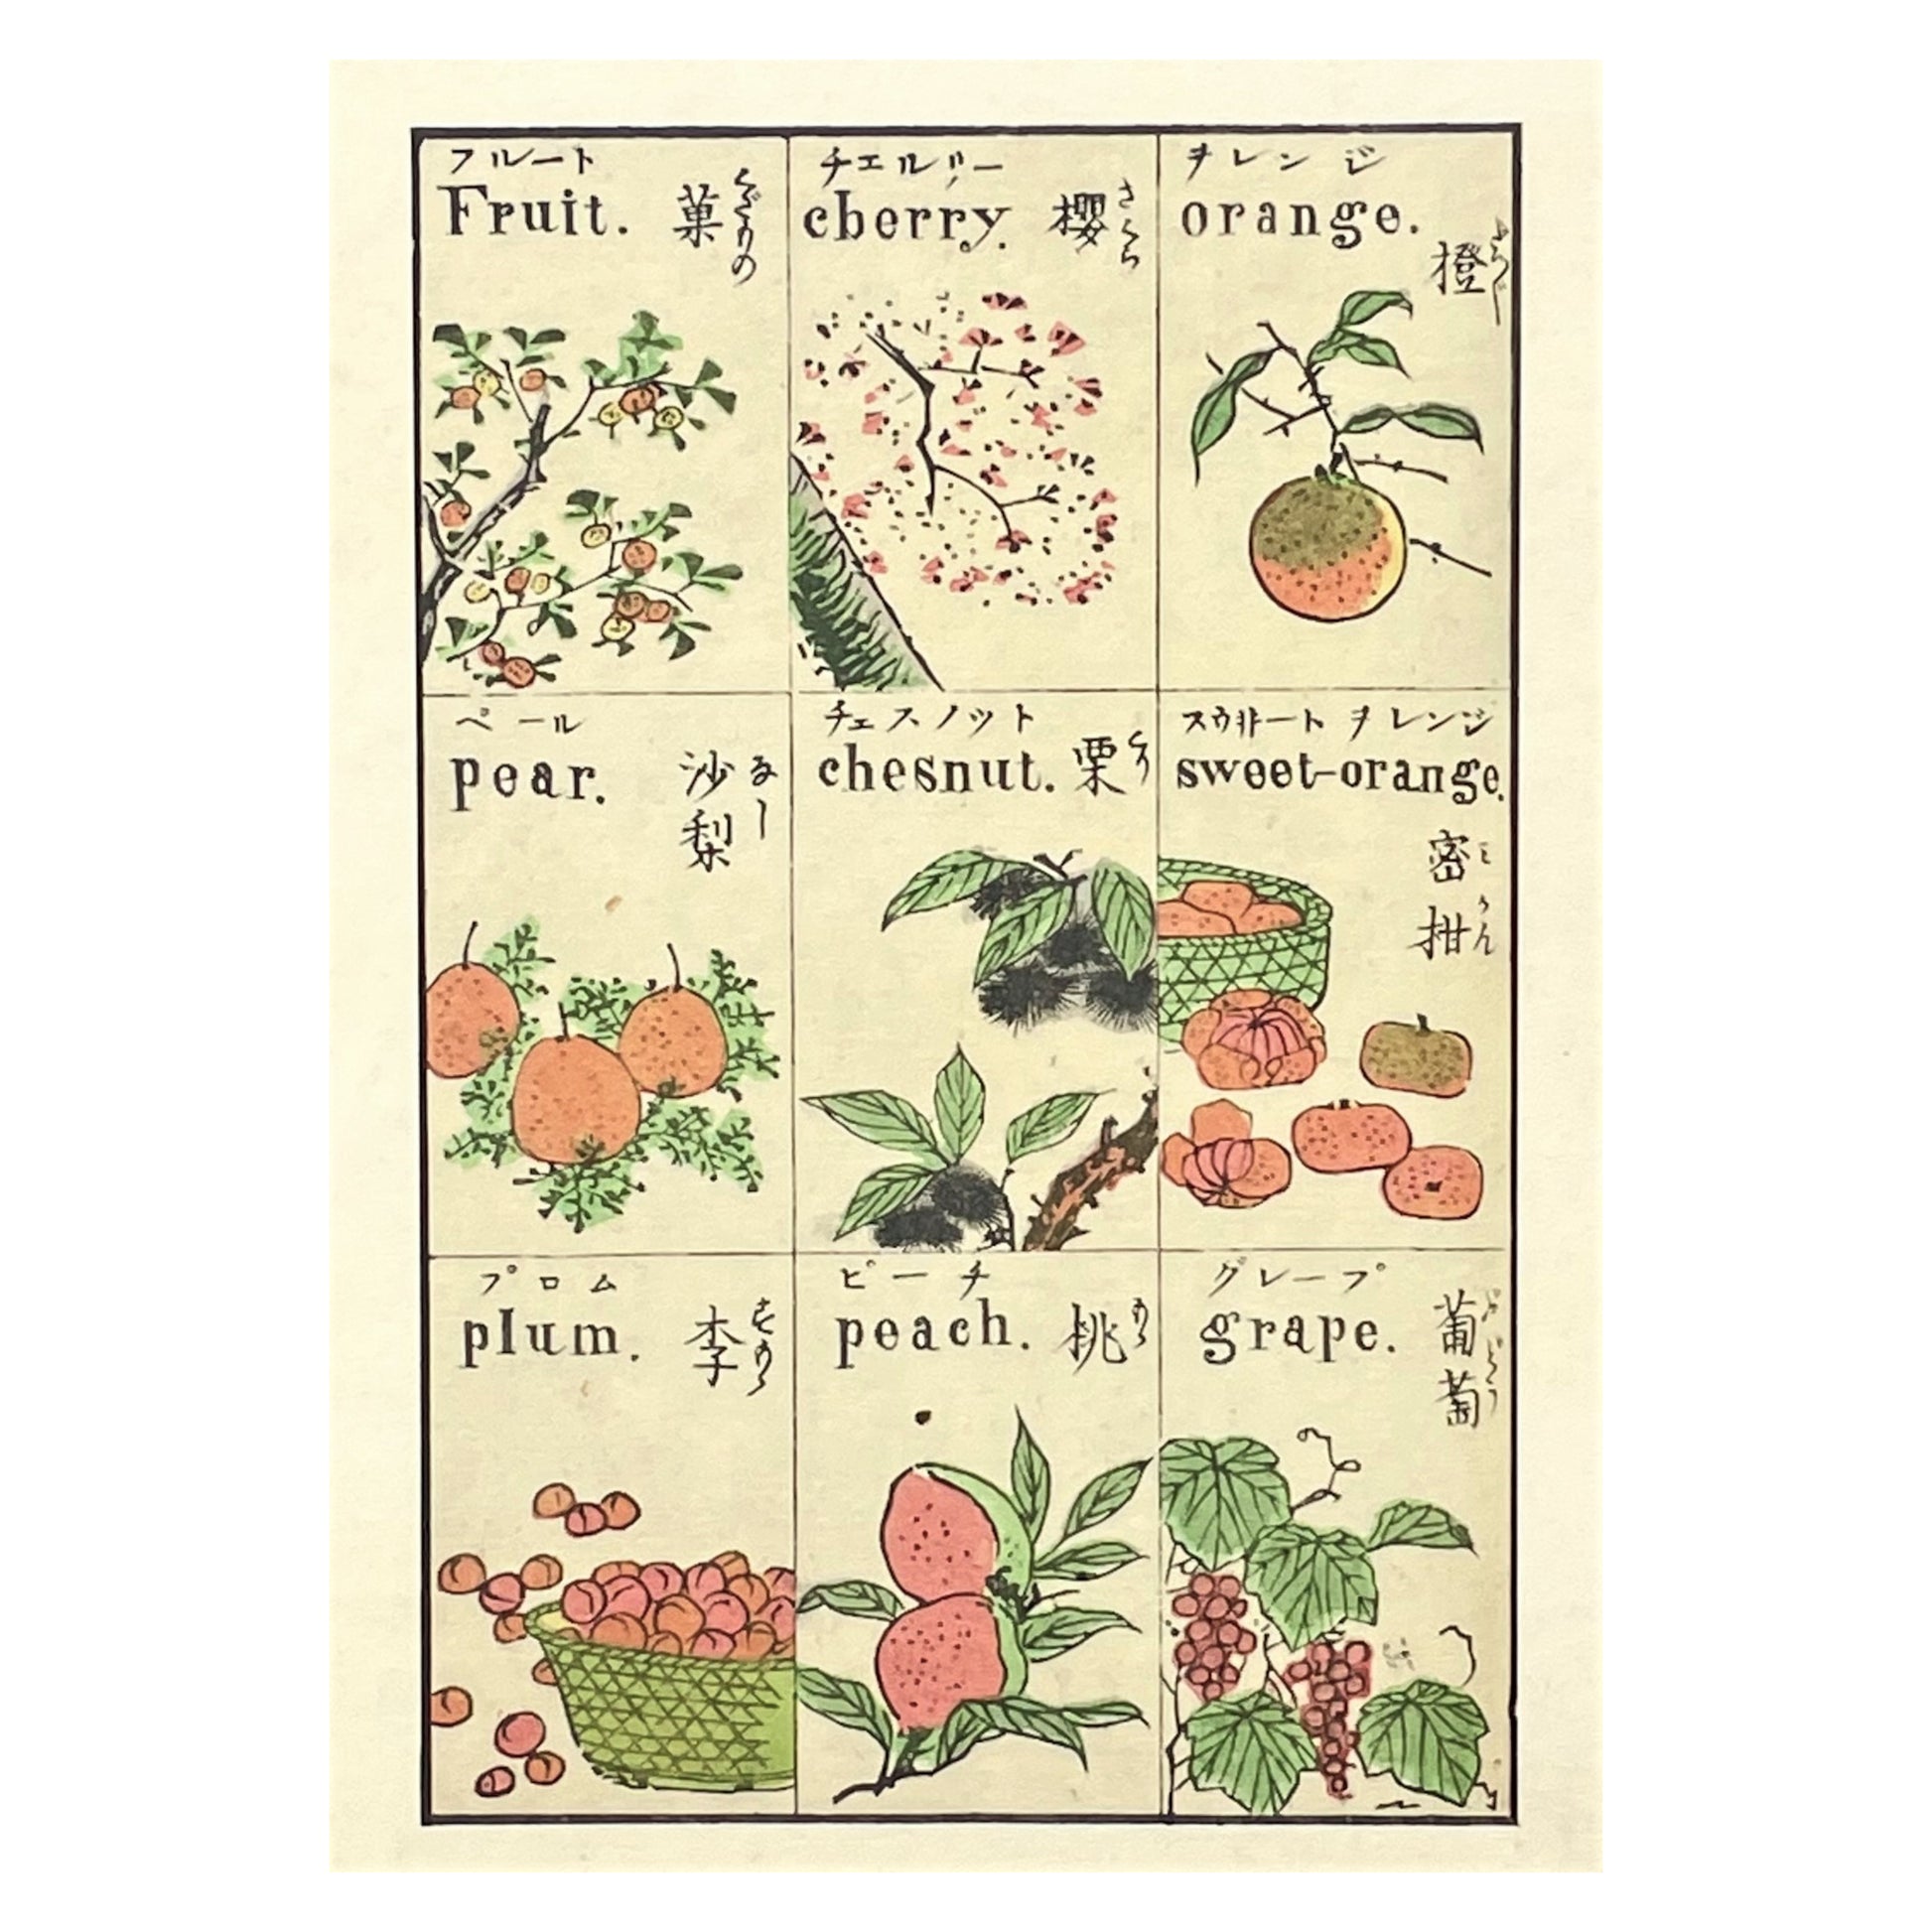 greetings card with drawings of japanese fruits by The Pattern Book